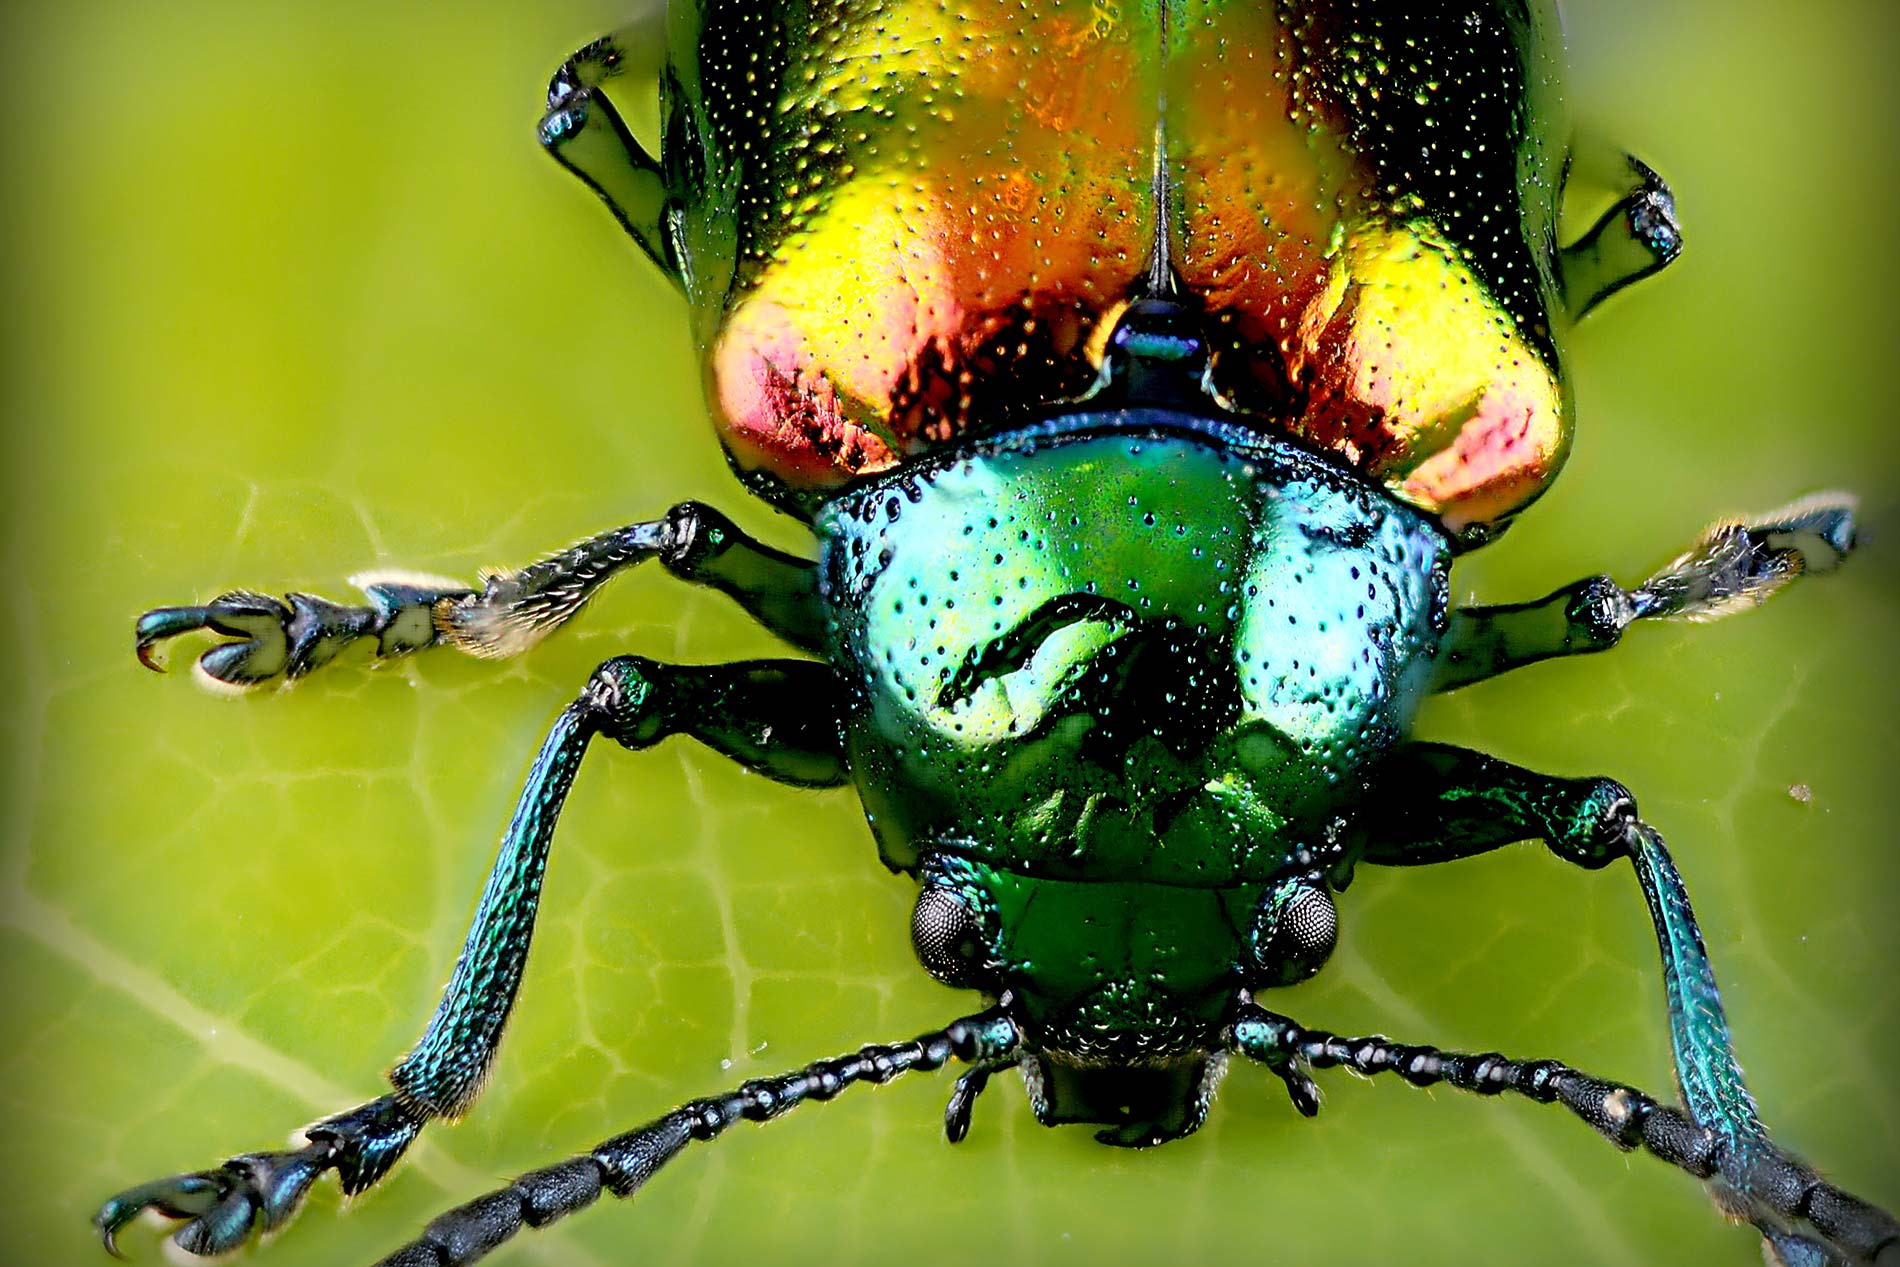 Colorful Beetle, Tacoma-based and family-owned pest control and inspection company